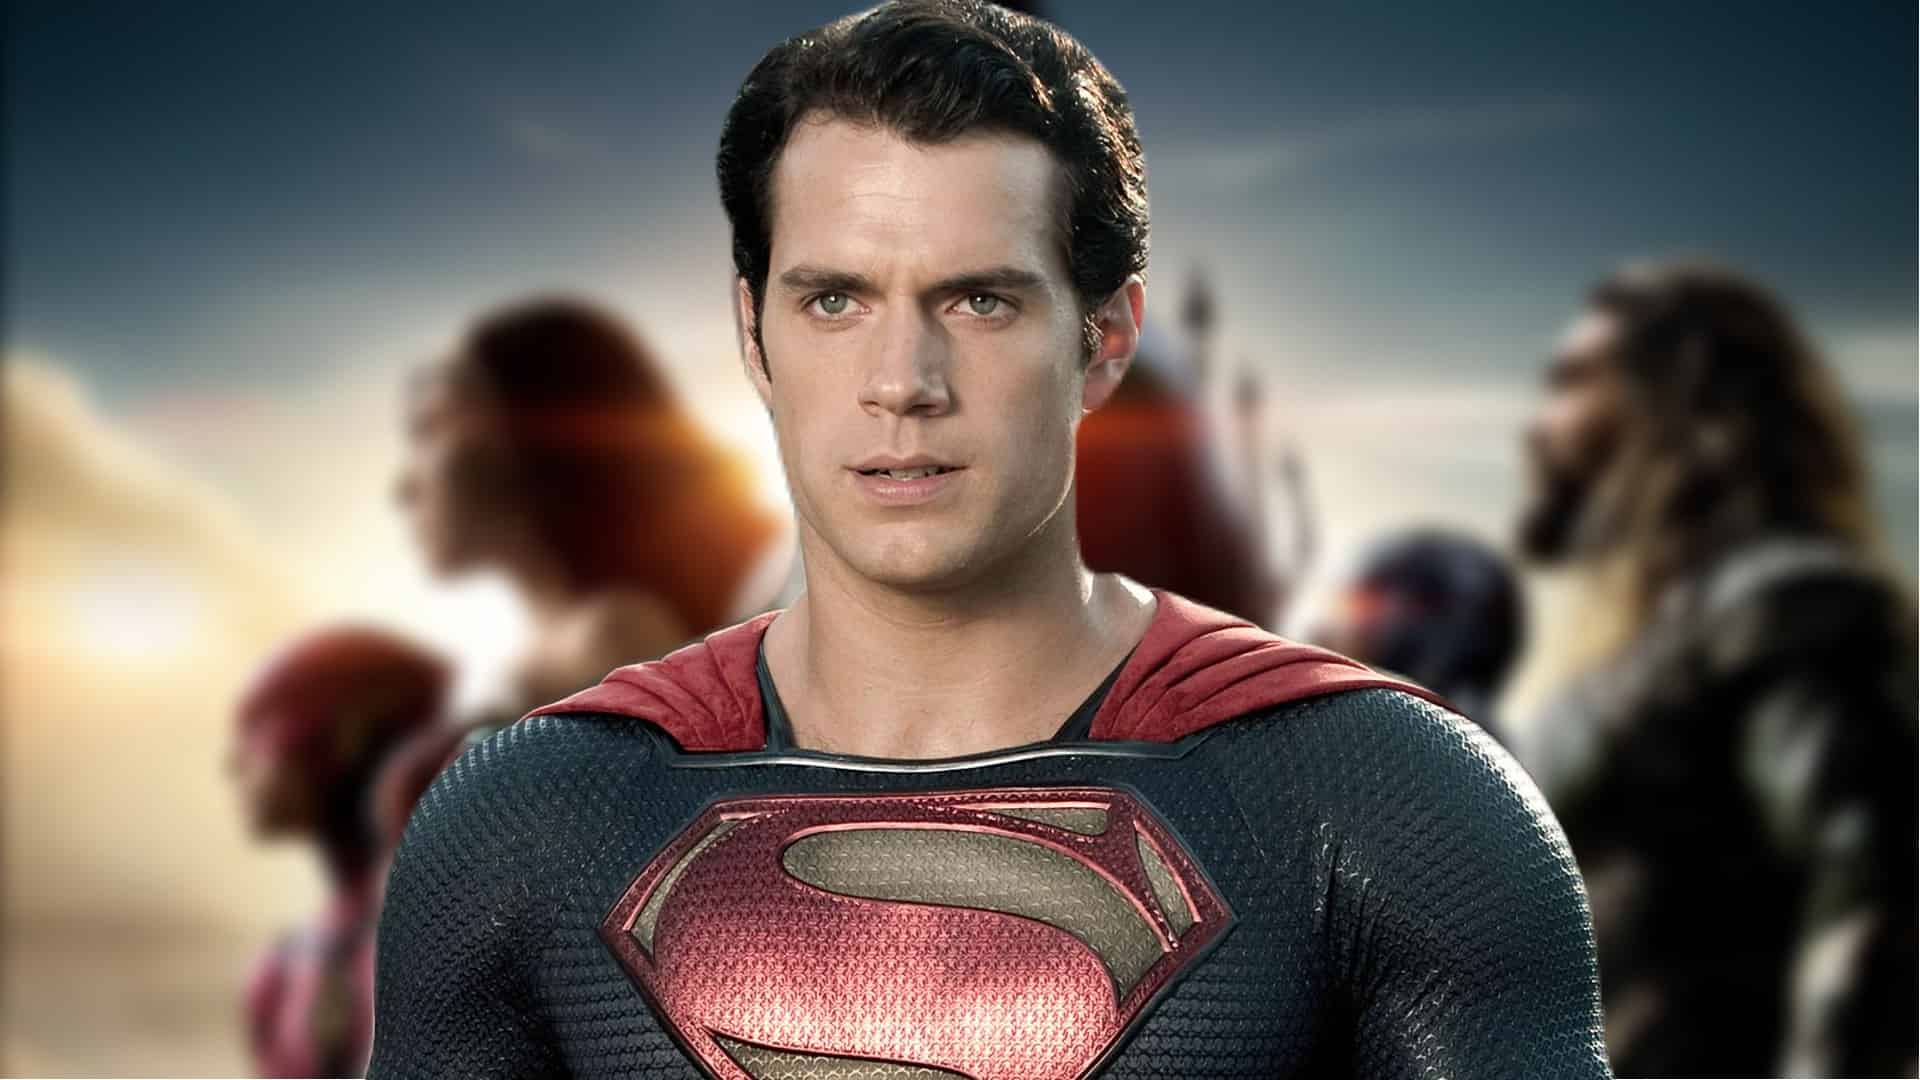 Is Henry Cavill's portrayal of Superman accurate? What is it about Henry  Cavill's Superman that's causing it to get bad reviews? - Quora